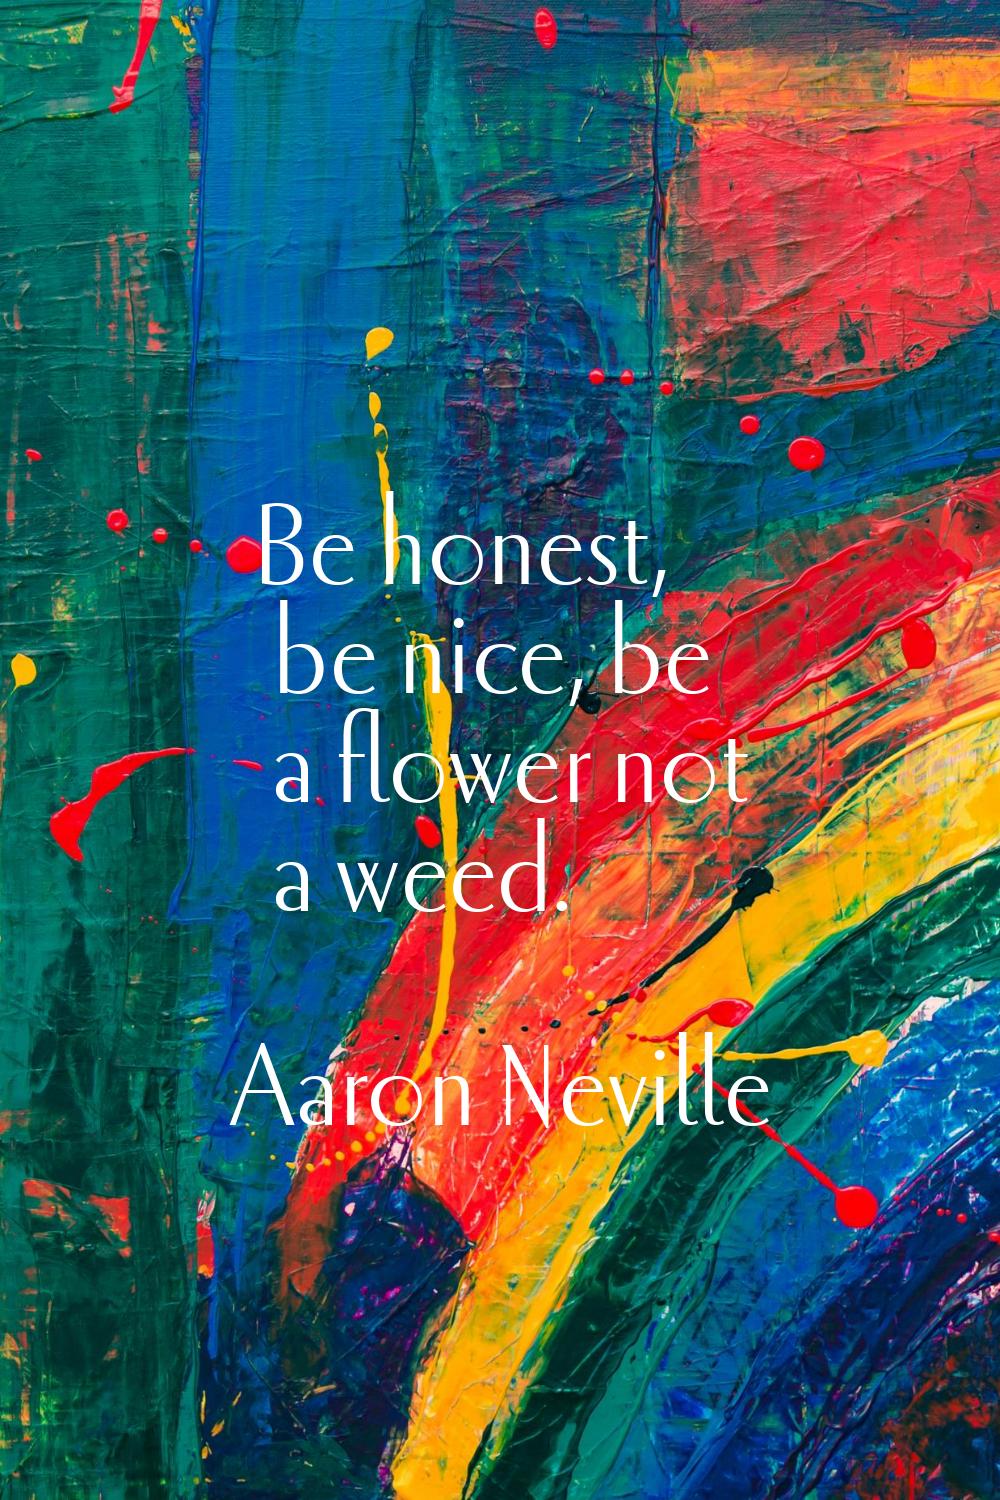 Be honest, be nice, be a flower not a weed.